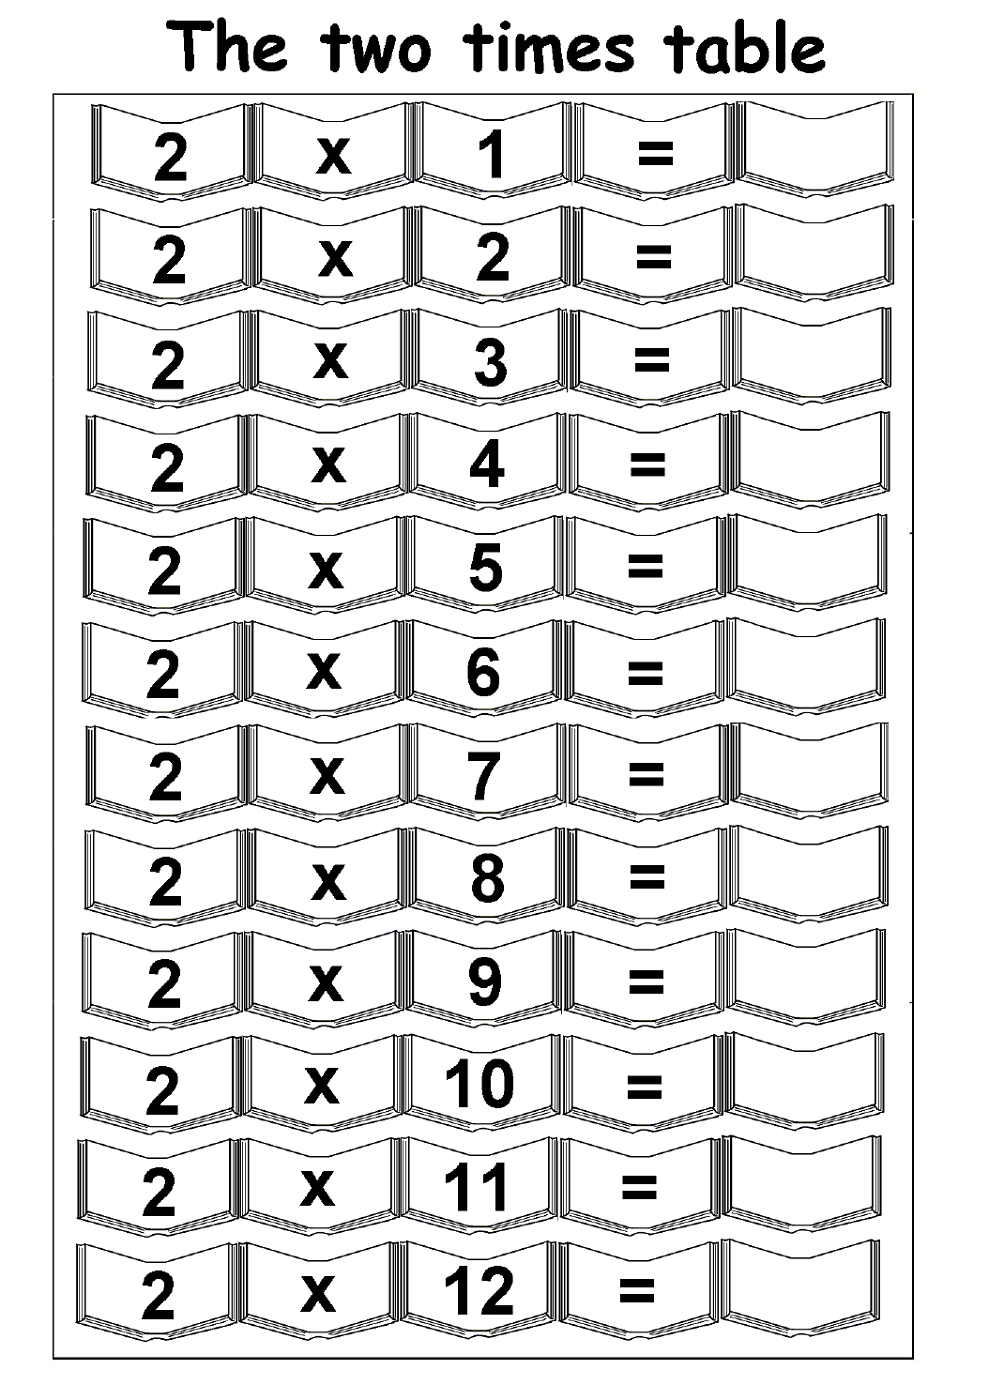 2 times table worksheet for math